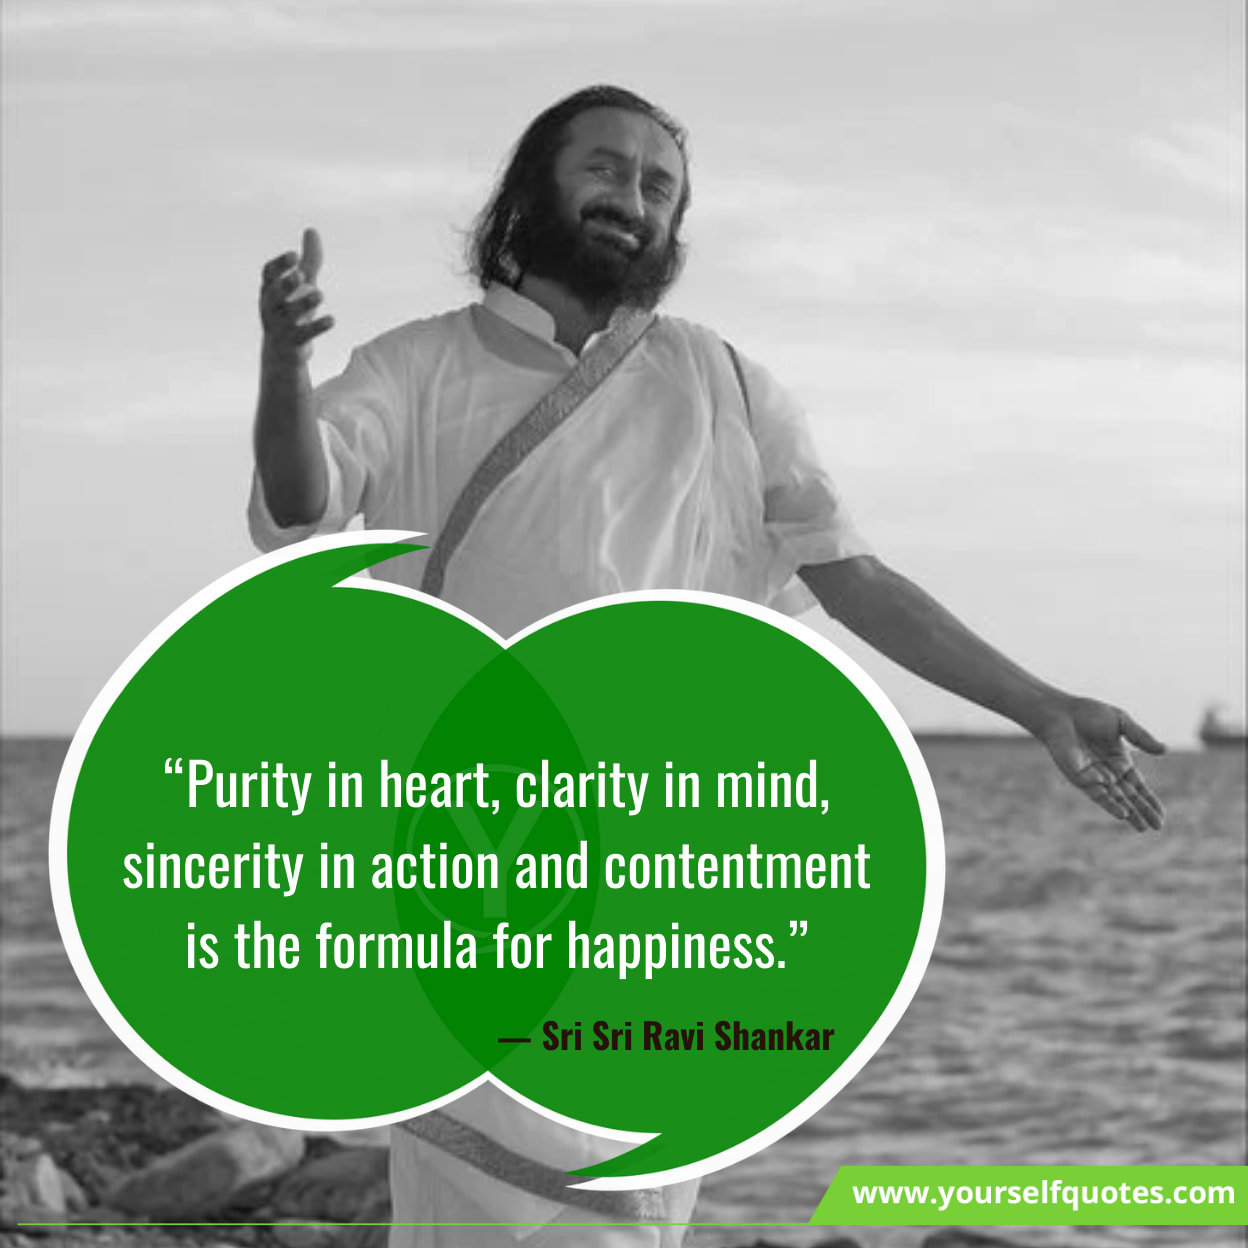 Art of Living Quotes On Happiness